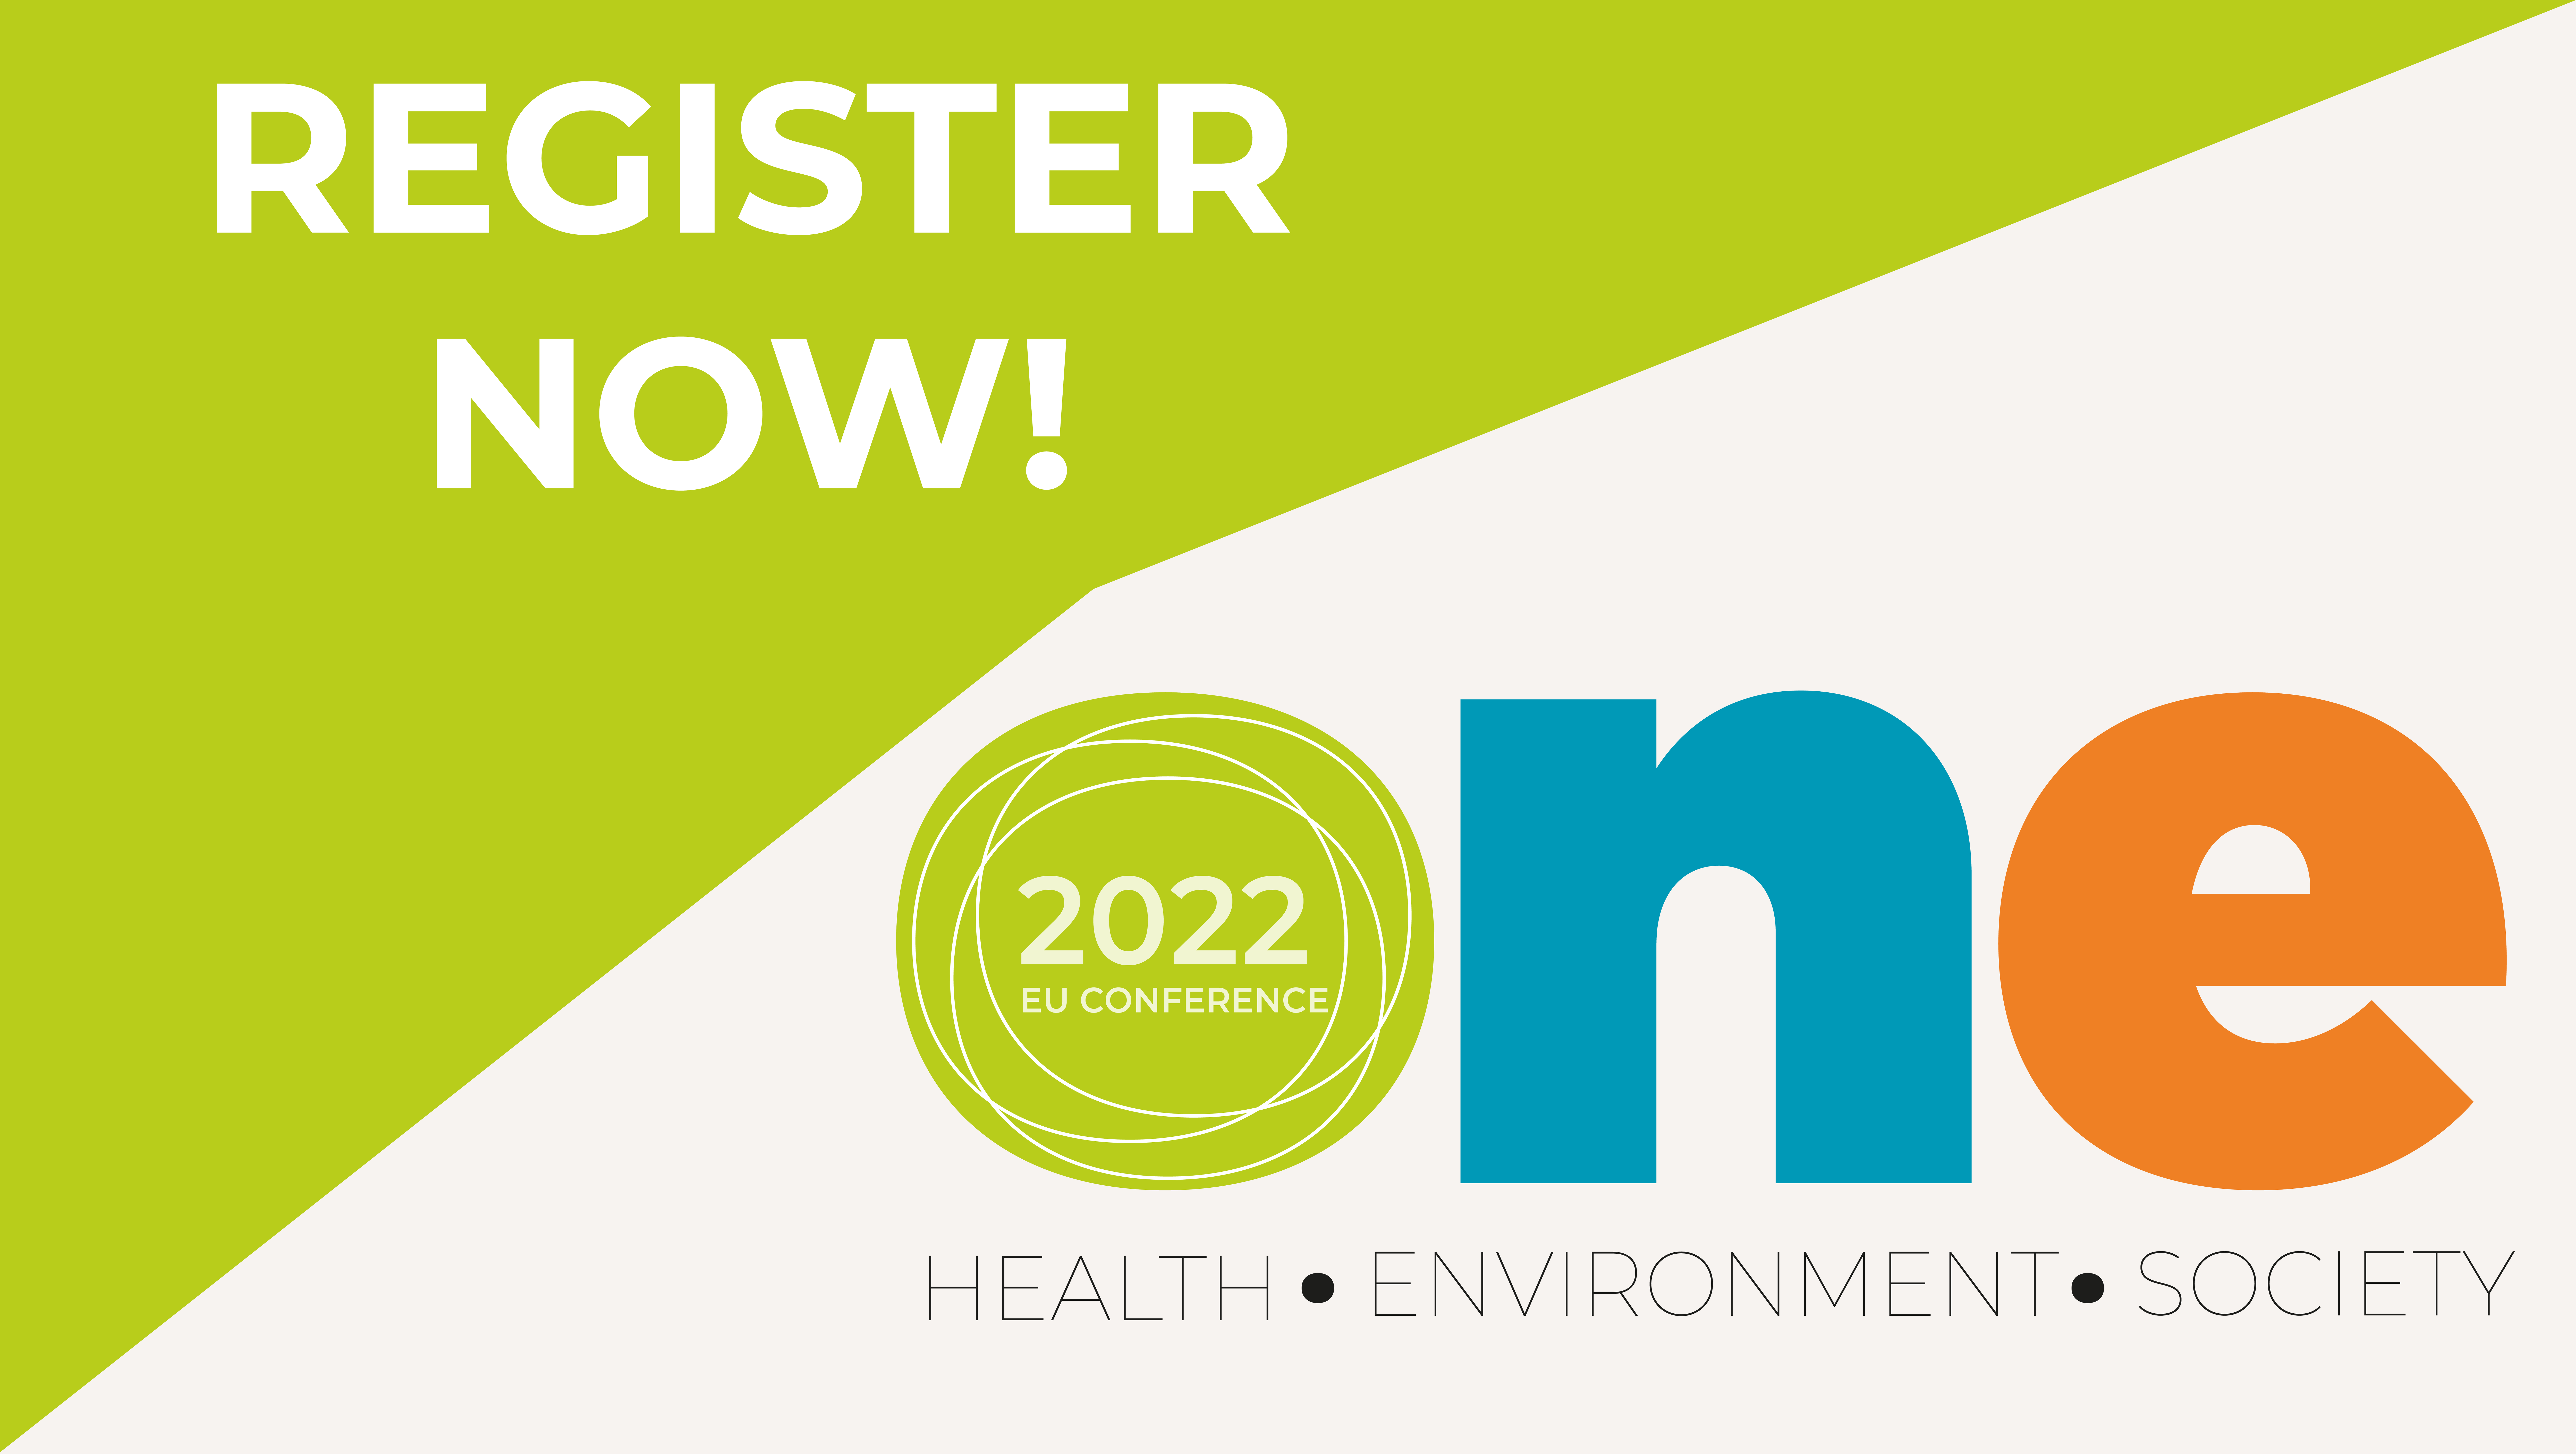 ONE Conference 2022 - Register now